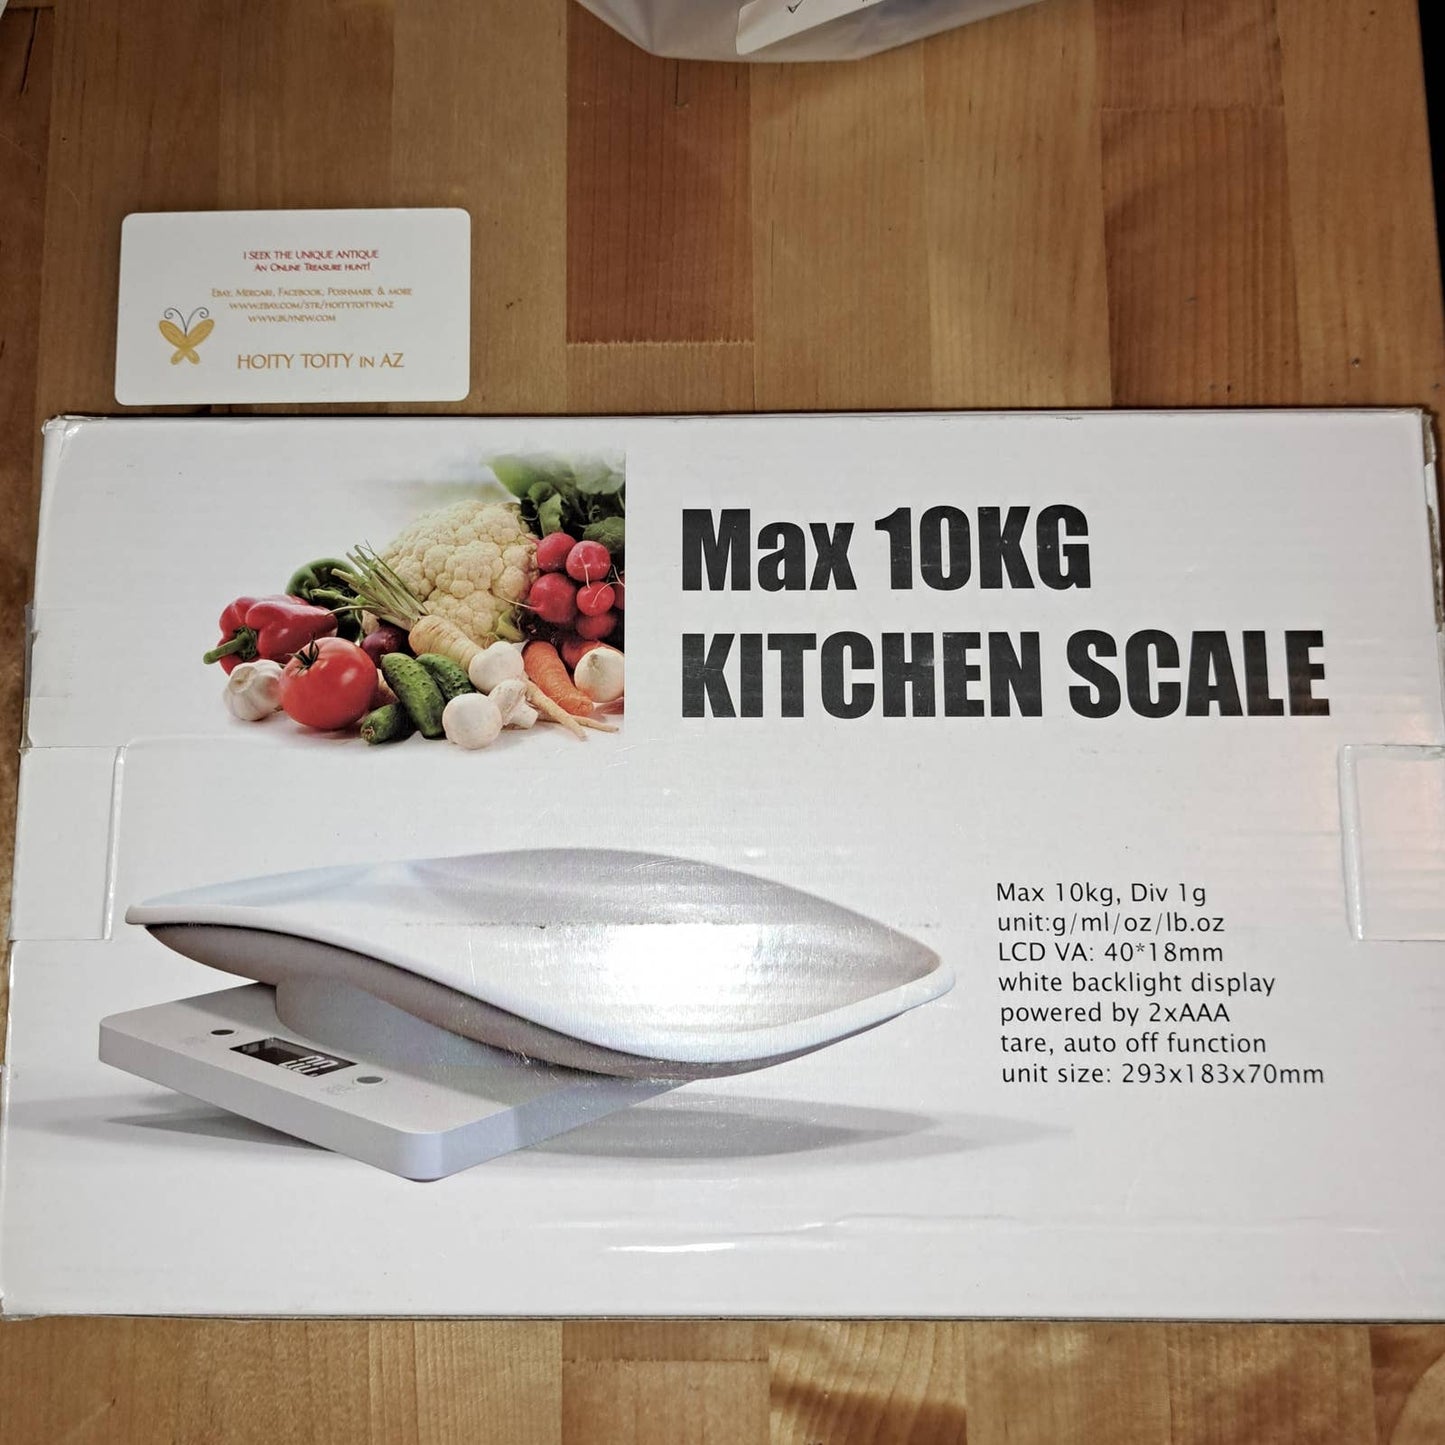 Digital Baby, pet food Scales with LCD Display-small 22 lbs max